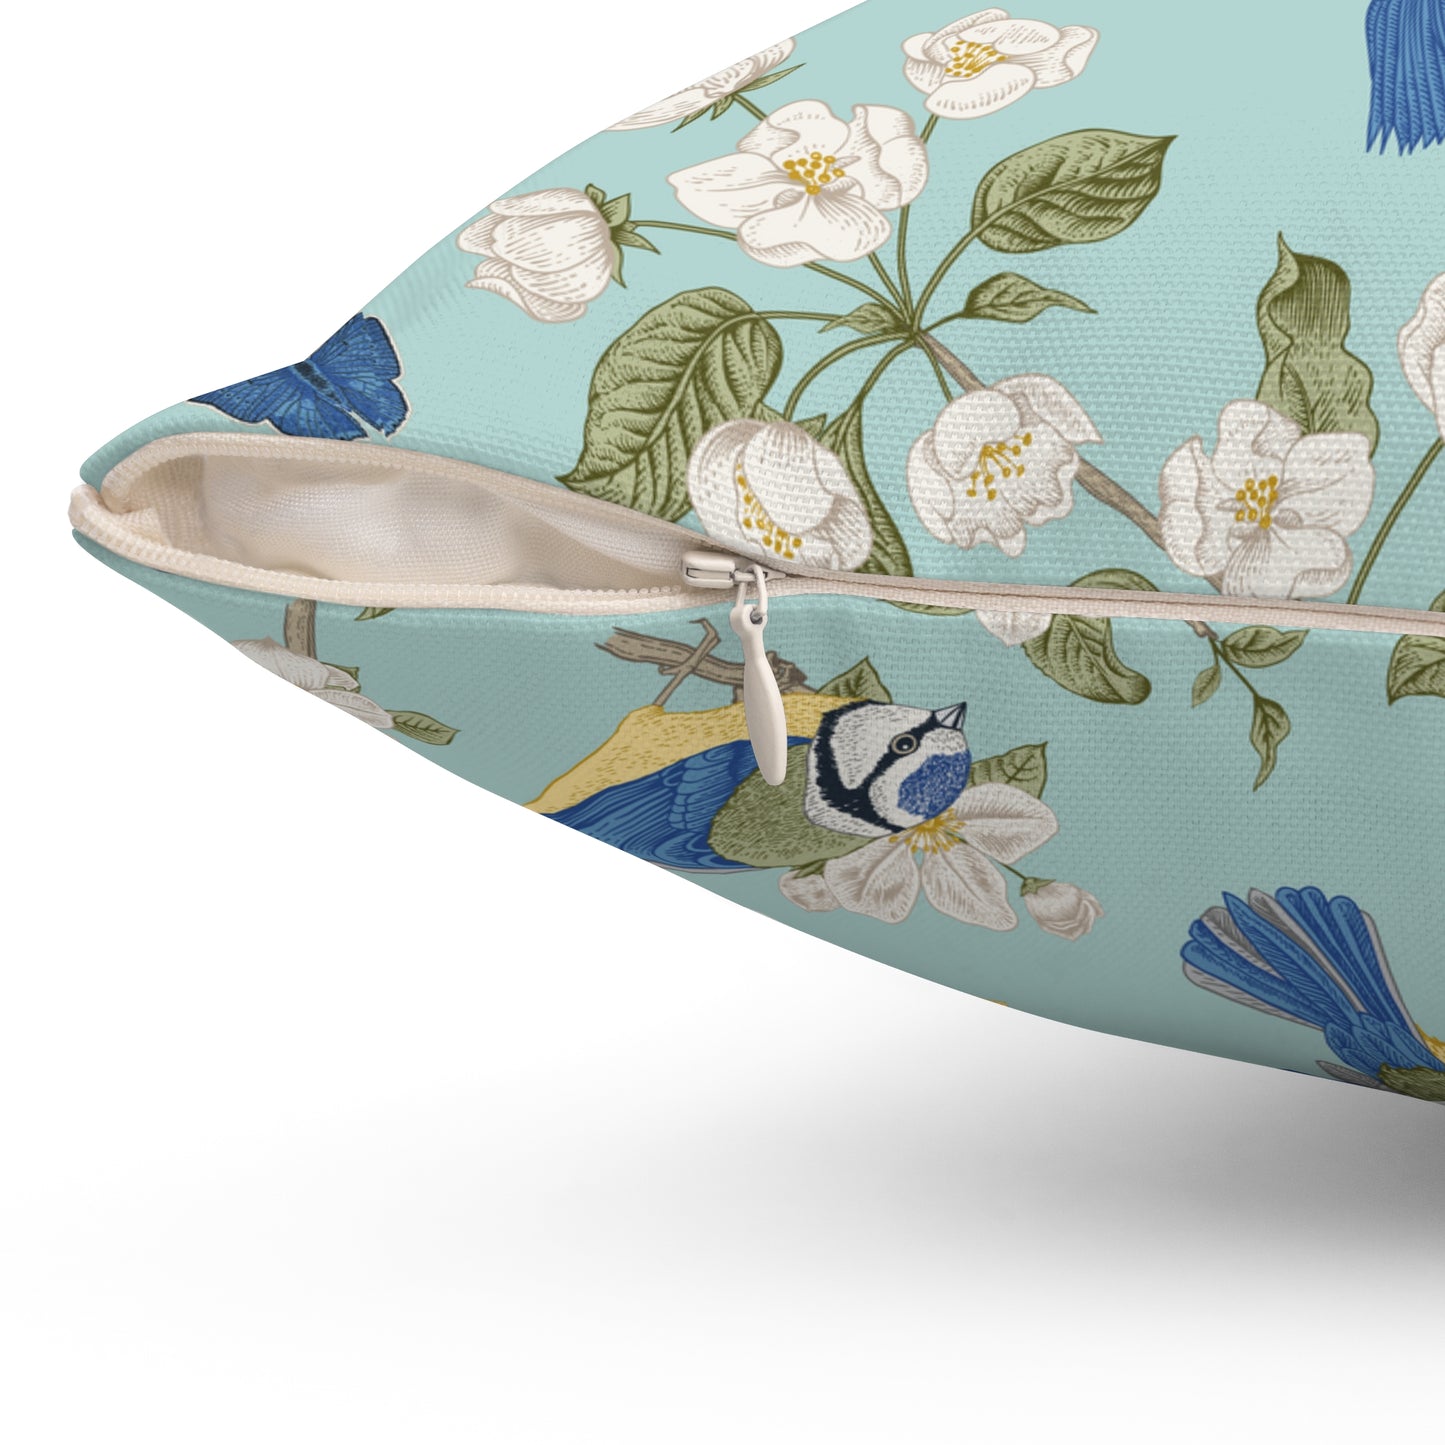 Chinoiserie Birds and Flowers Spun Polyester Square Pillow